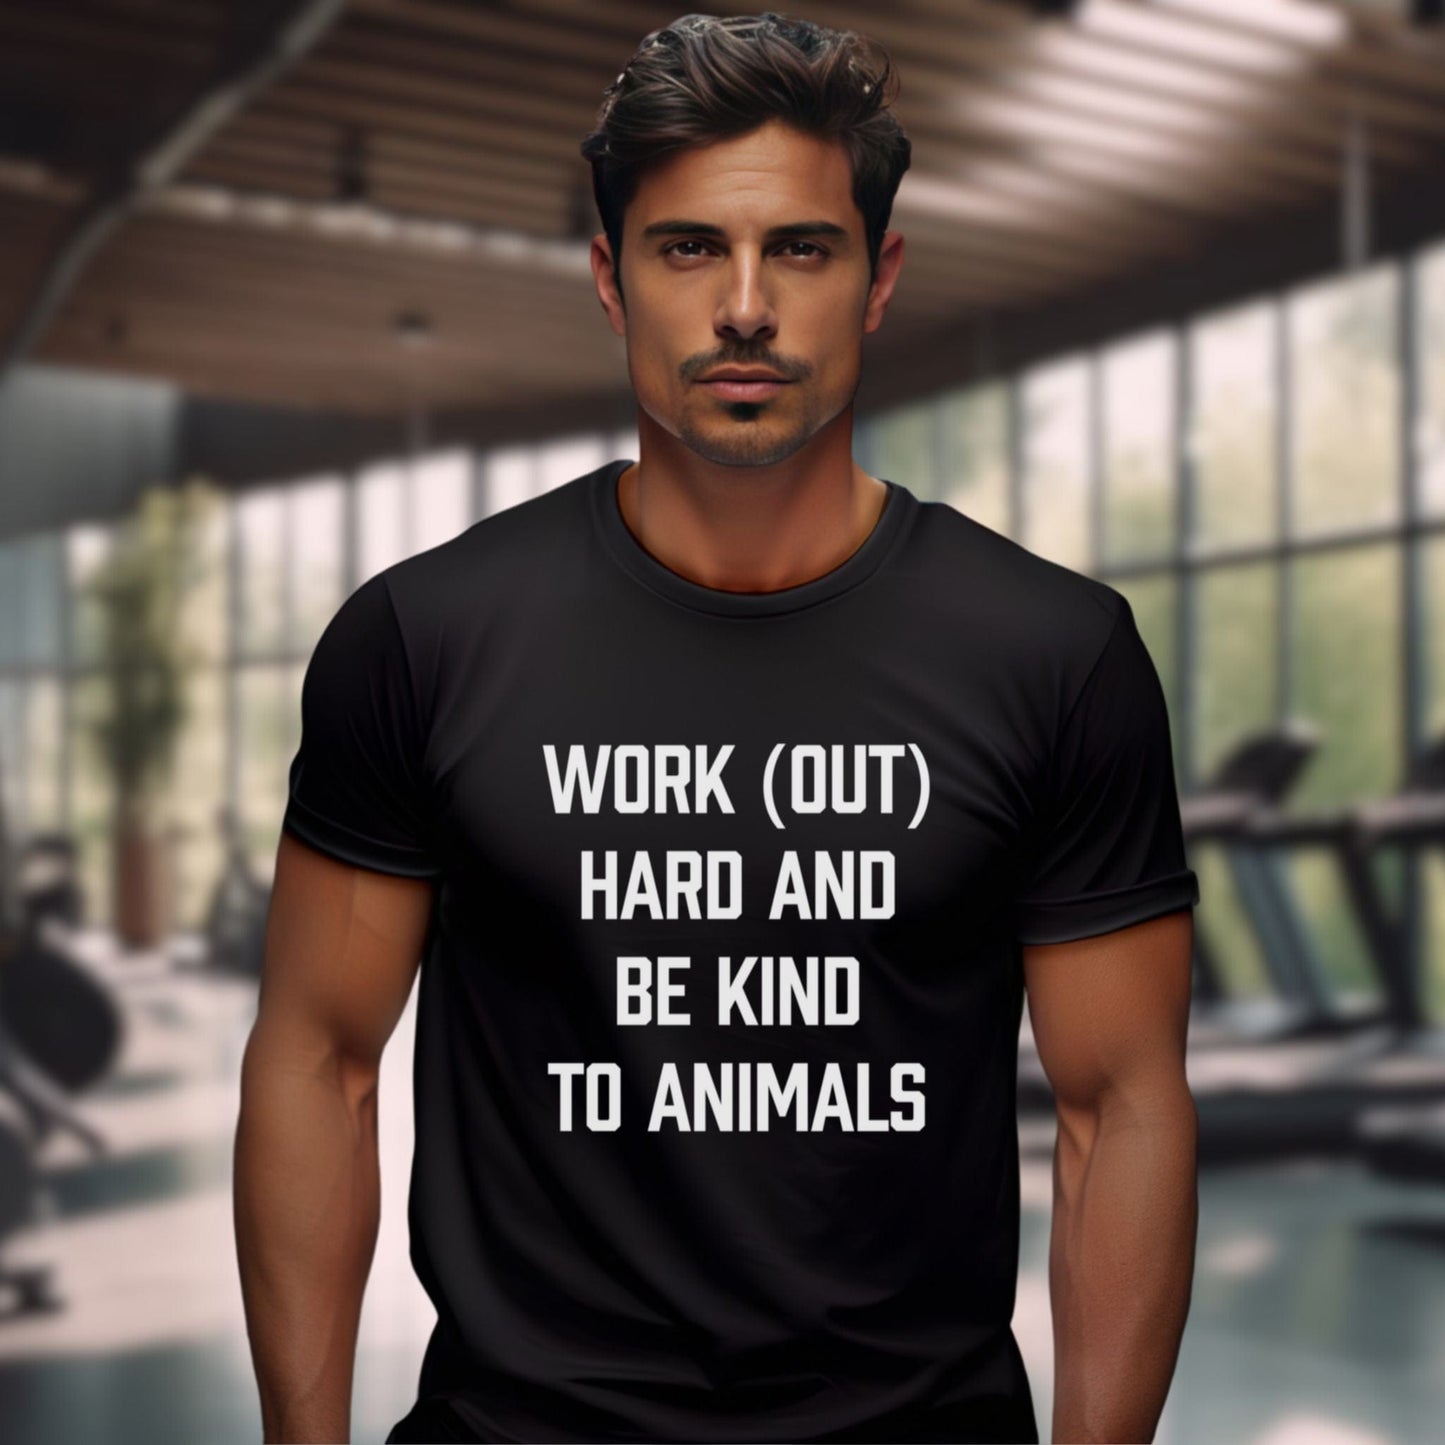 Work (Out) Hard And Be Kind To Animals Black T-Shirt